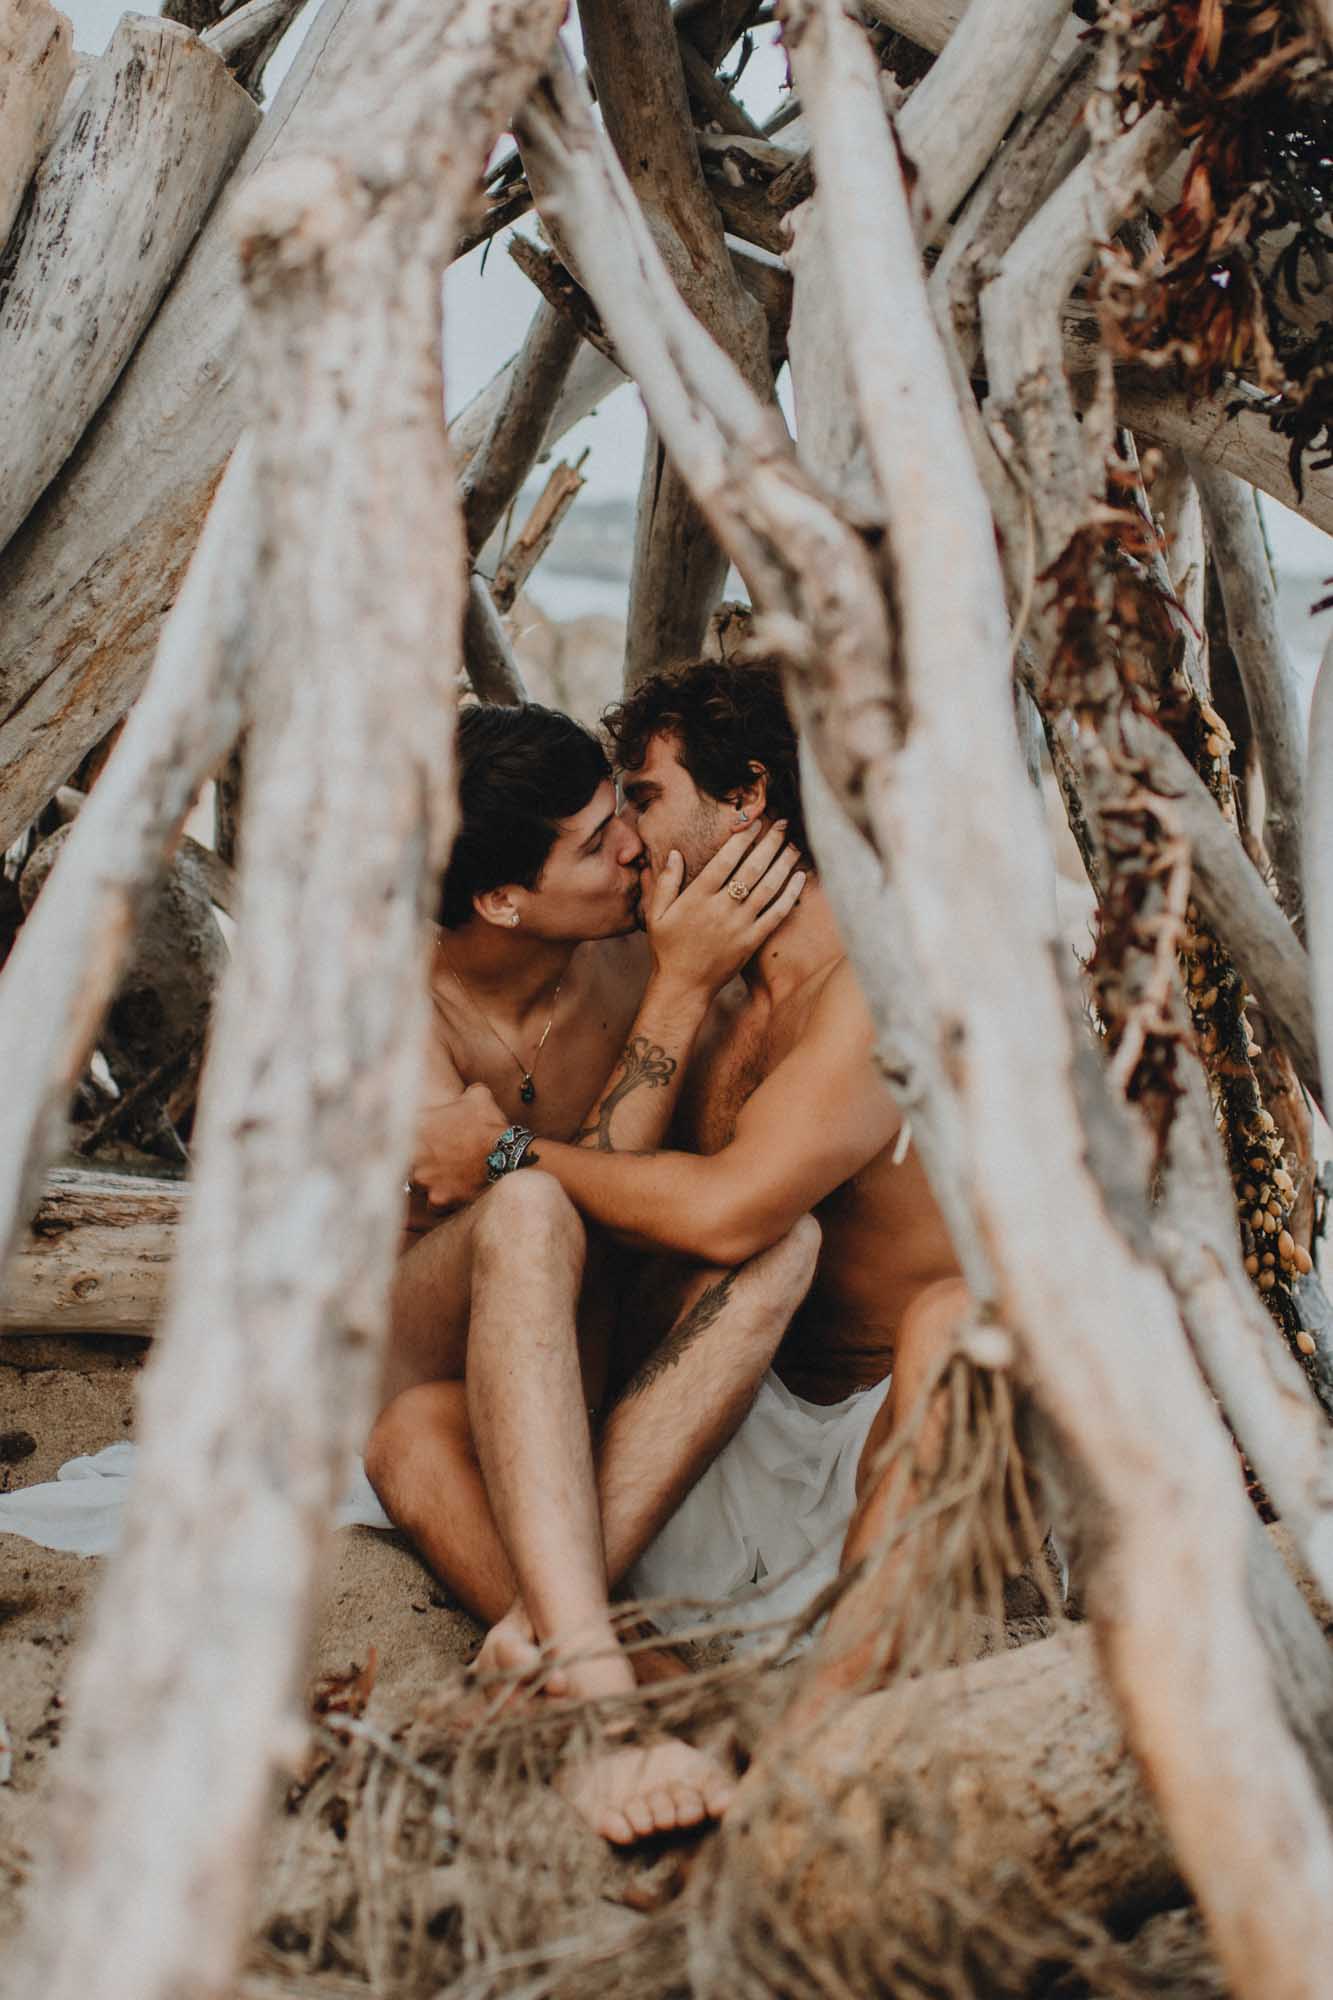 Mermen in love beach photoshoot, photos by Flora Gibson Photography, published on Equally Wed, the world's leading LGBTQ+ wedding magazine and vendor directory